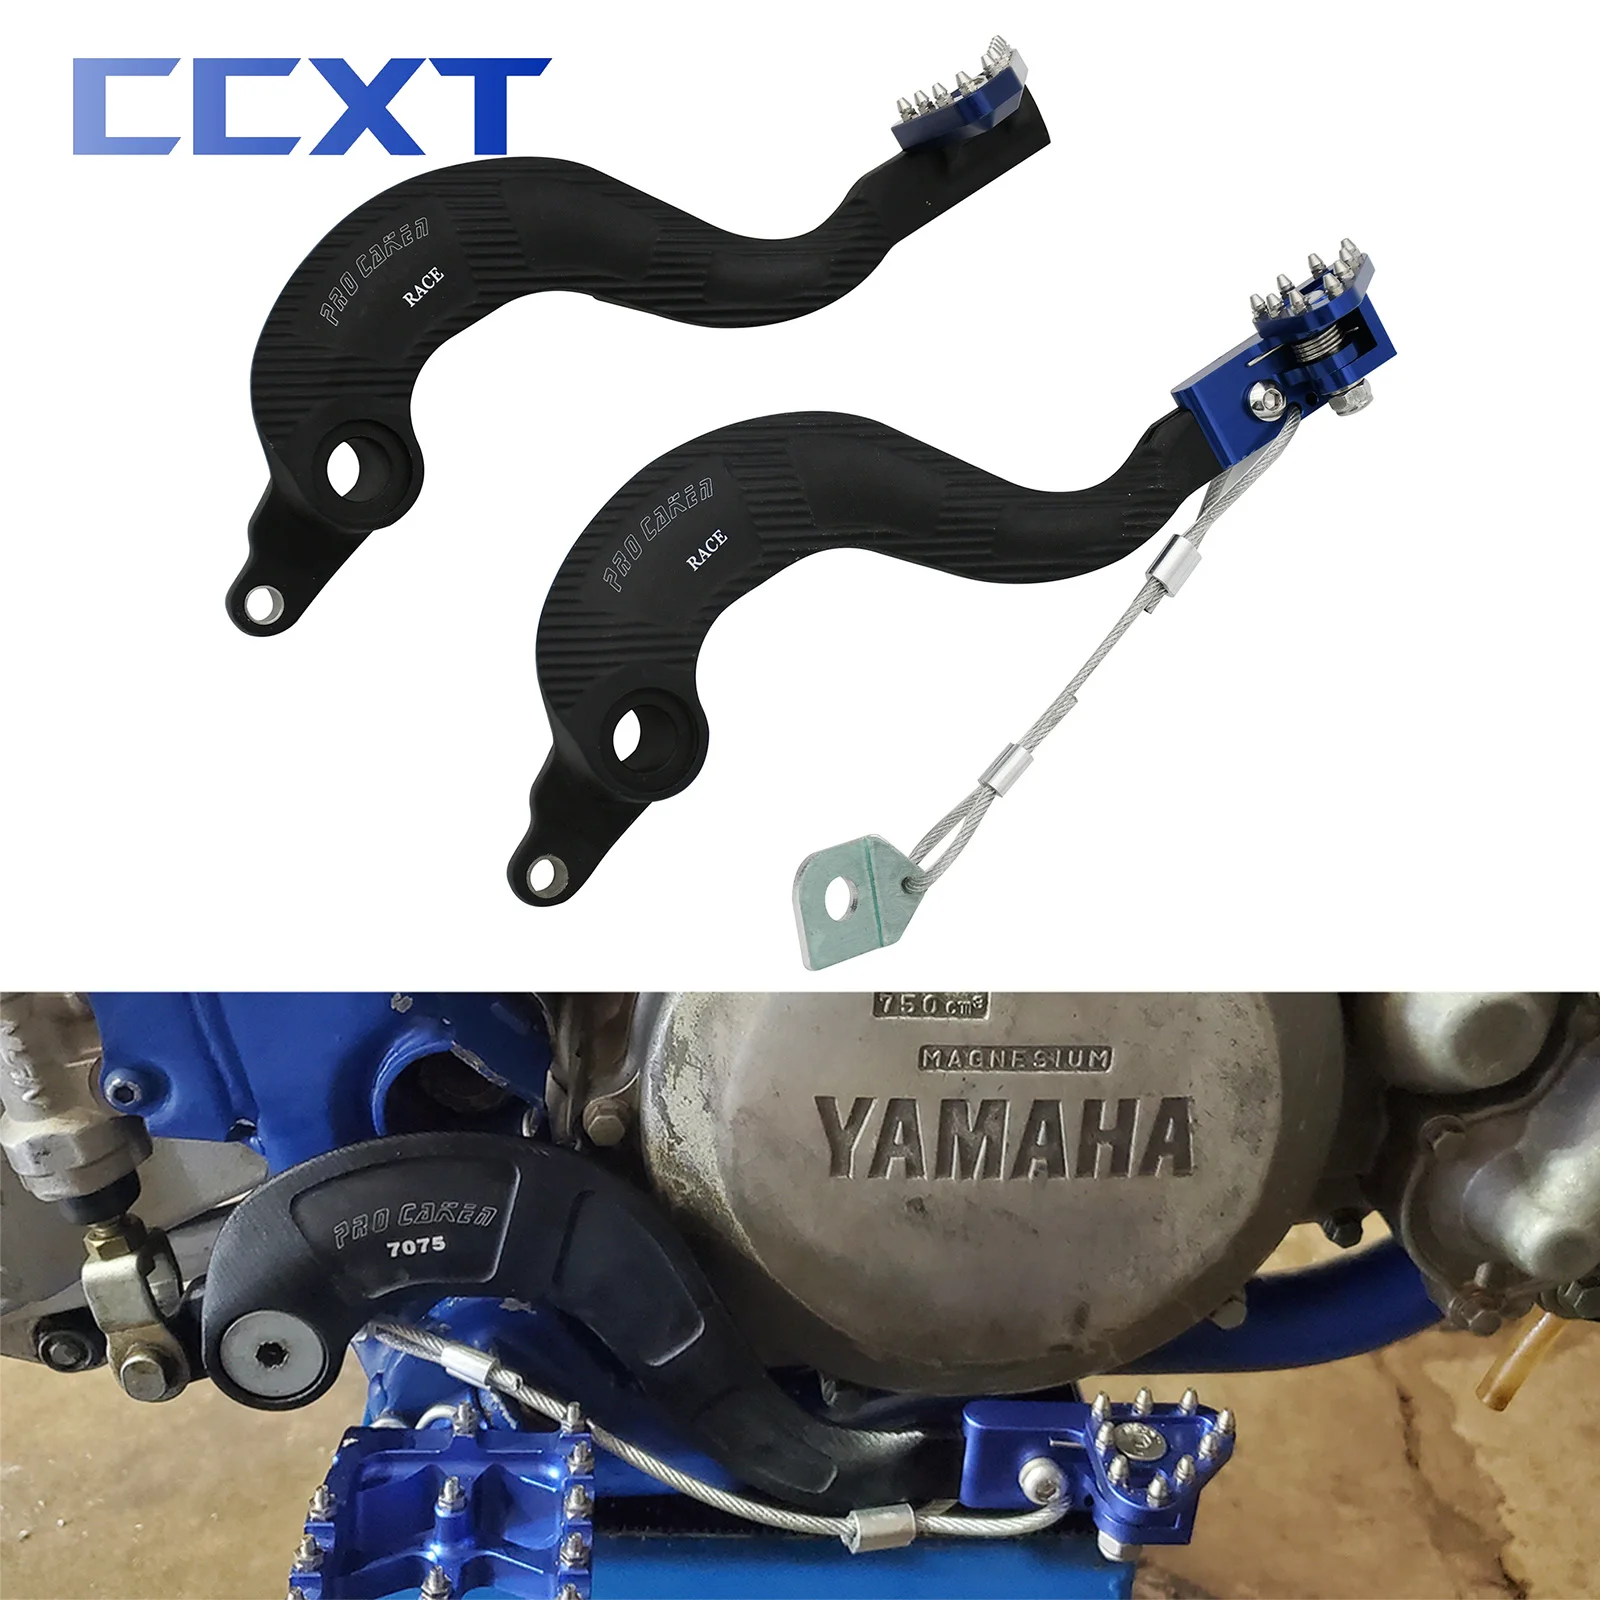 

CNC Rear Brake Pedal Lever For Yamaha WR250F WR400F WR426F WR450F YZ125 YZ250 YZ250X YZ250F YZ400F YZ426F YZ450F 1997-2019 2020